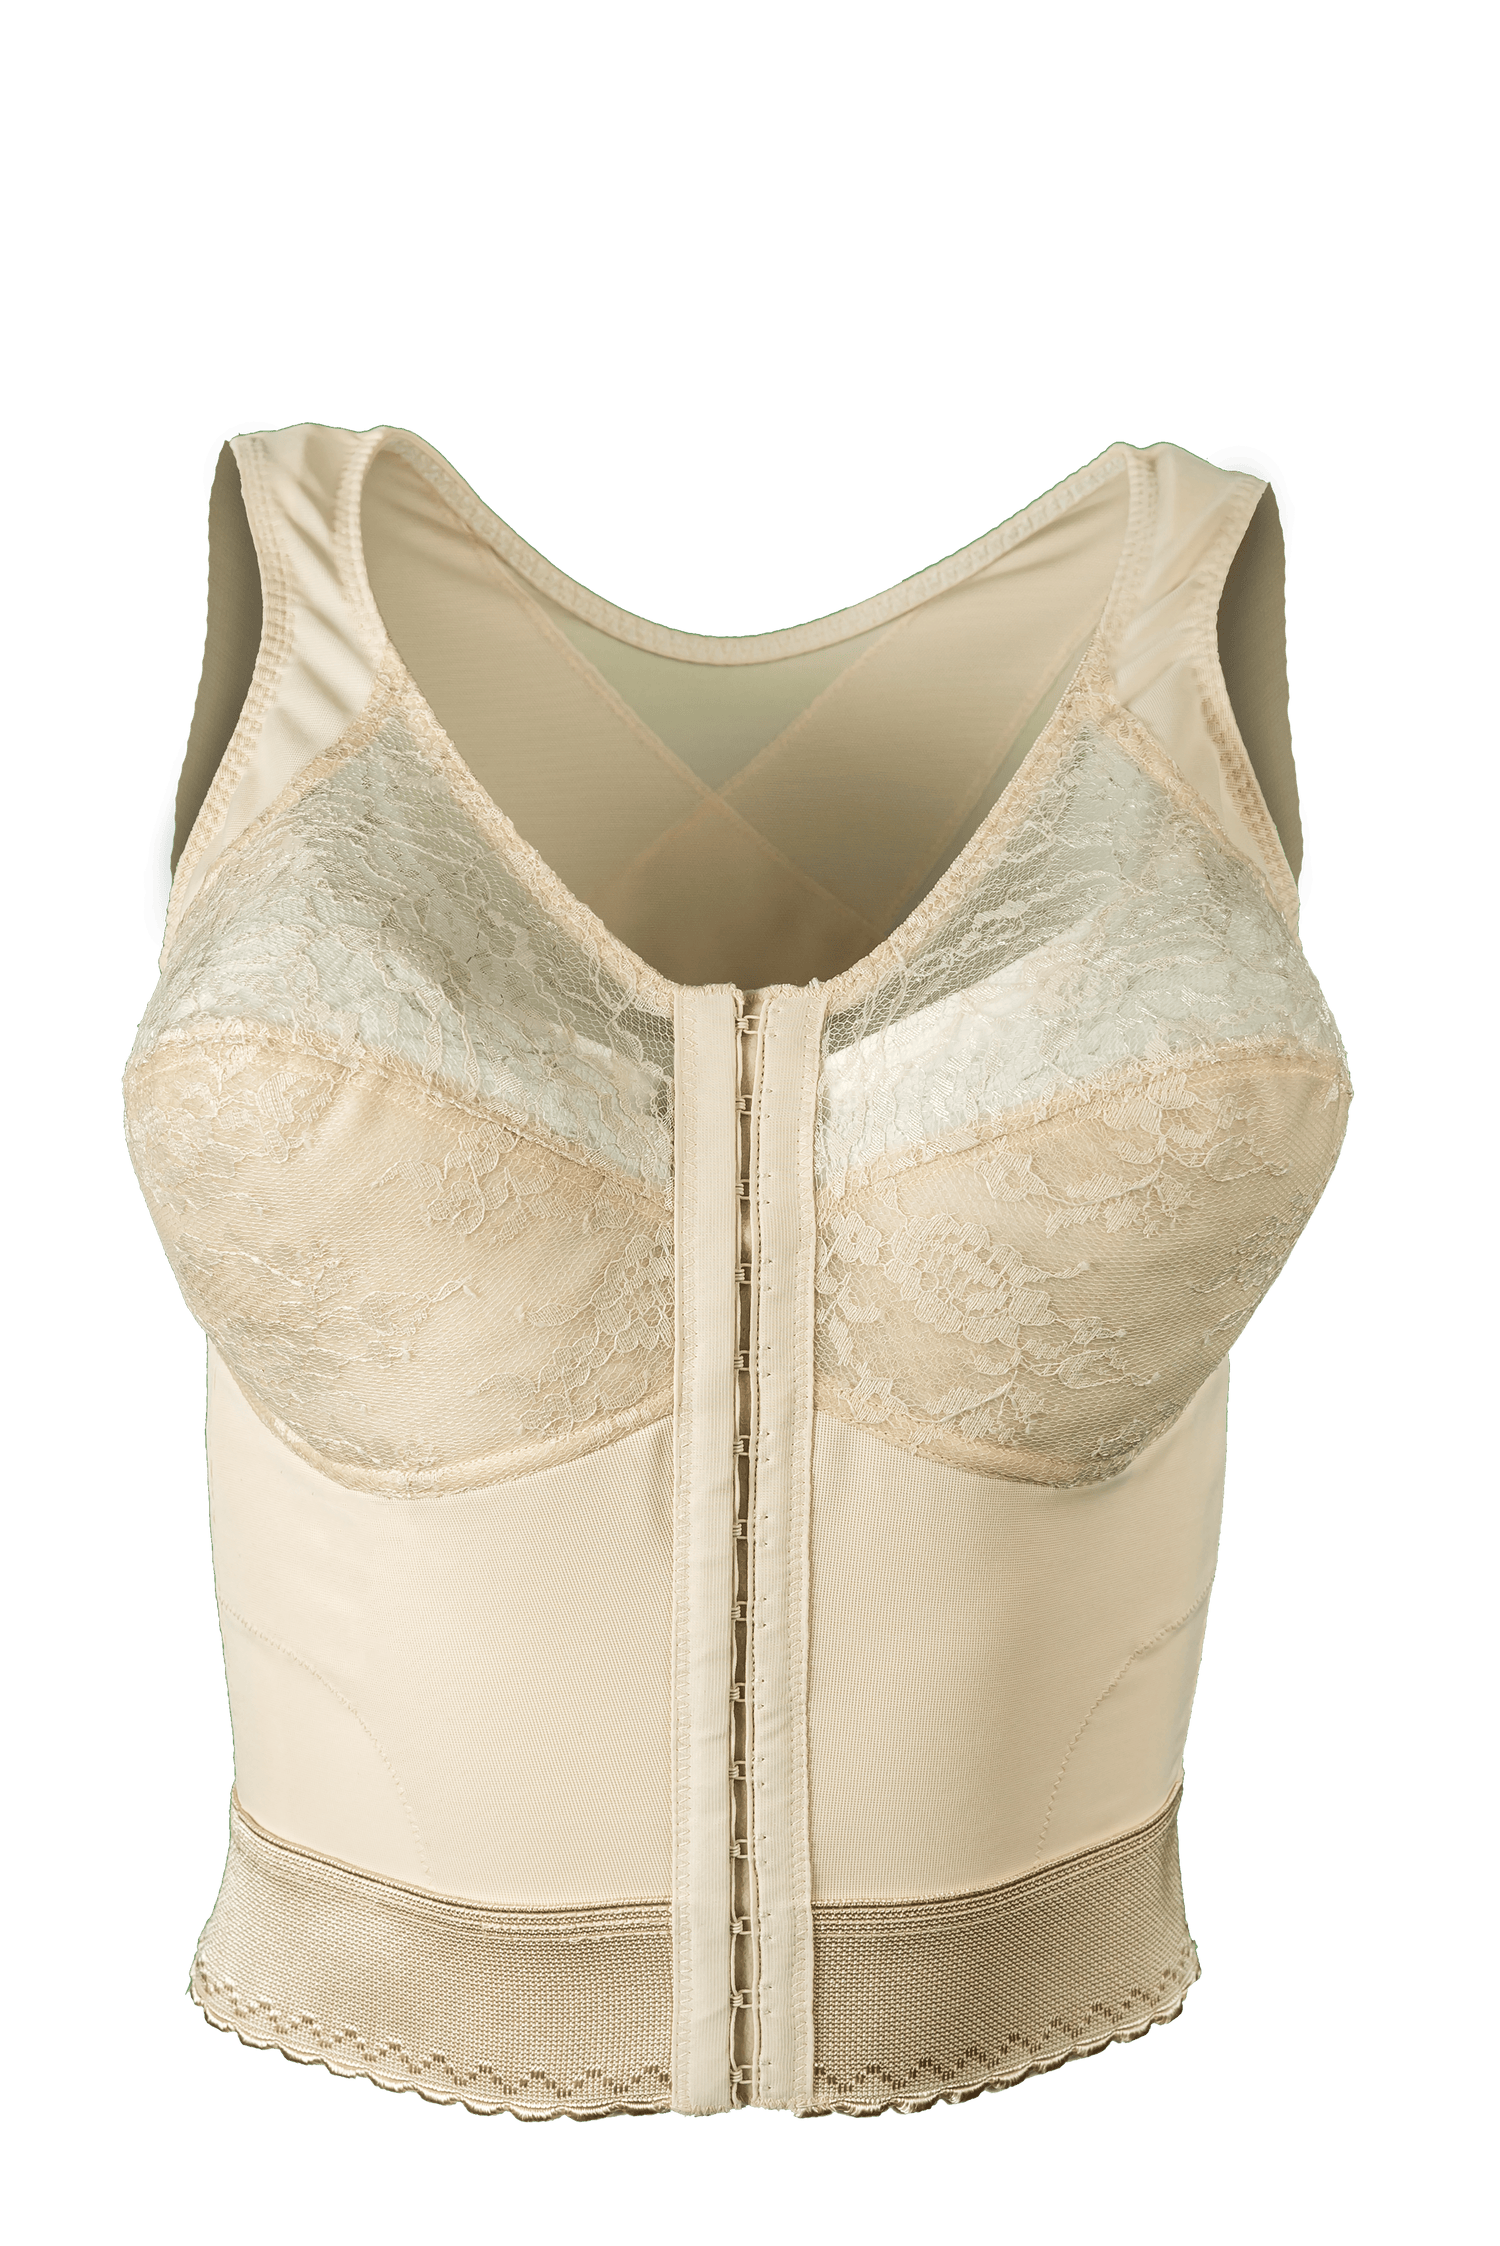 Cortland Intimates Front Closure Back Support Long Line Bra - Macy's